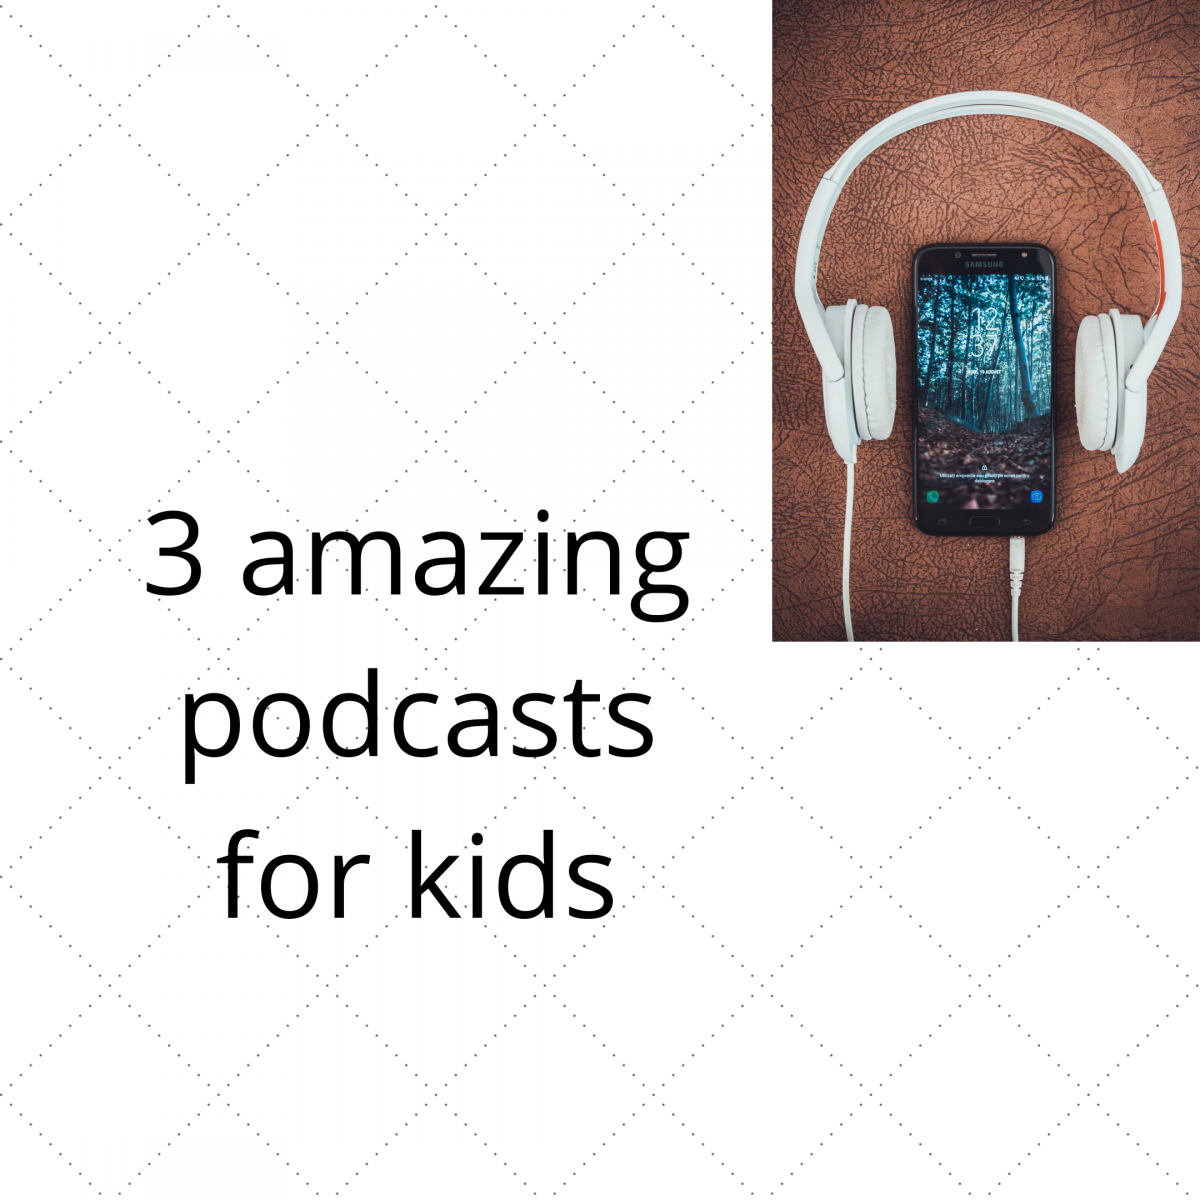 3 amazing podcasts for kids